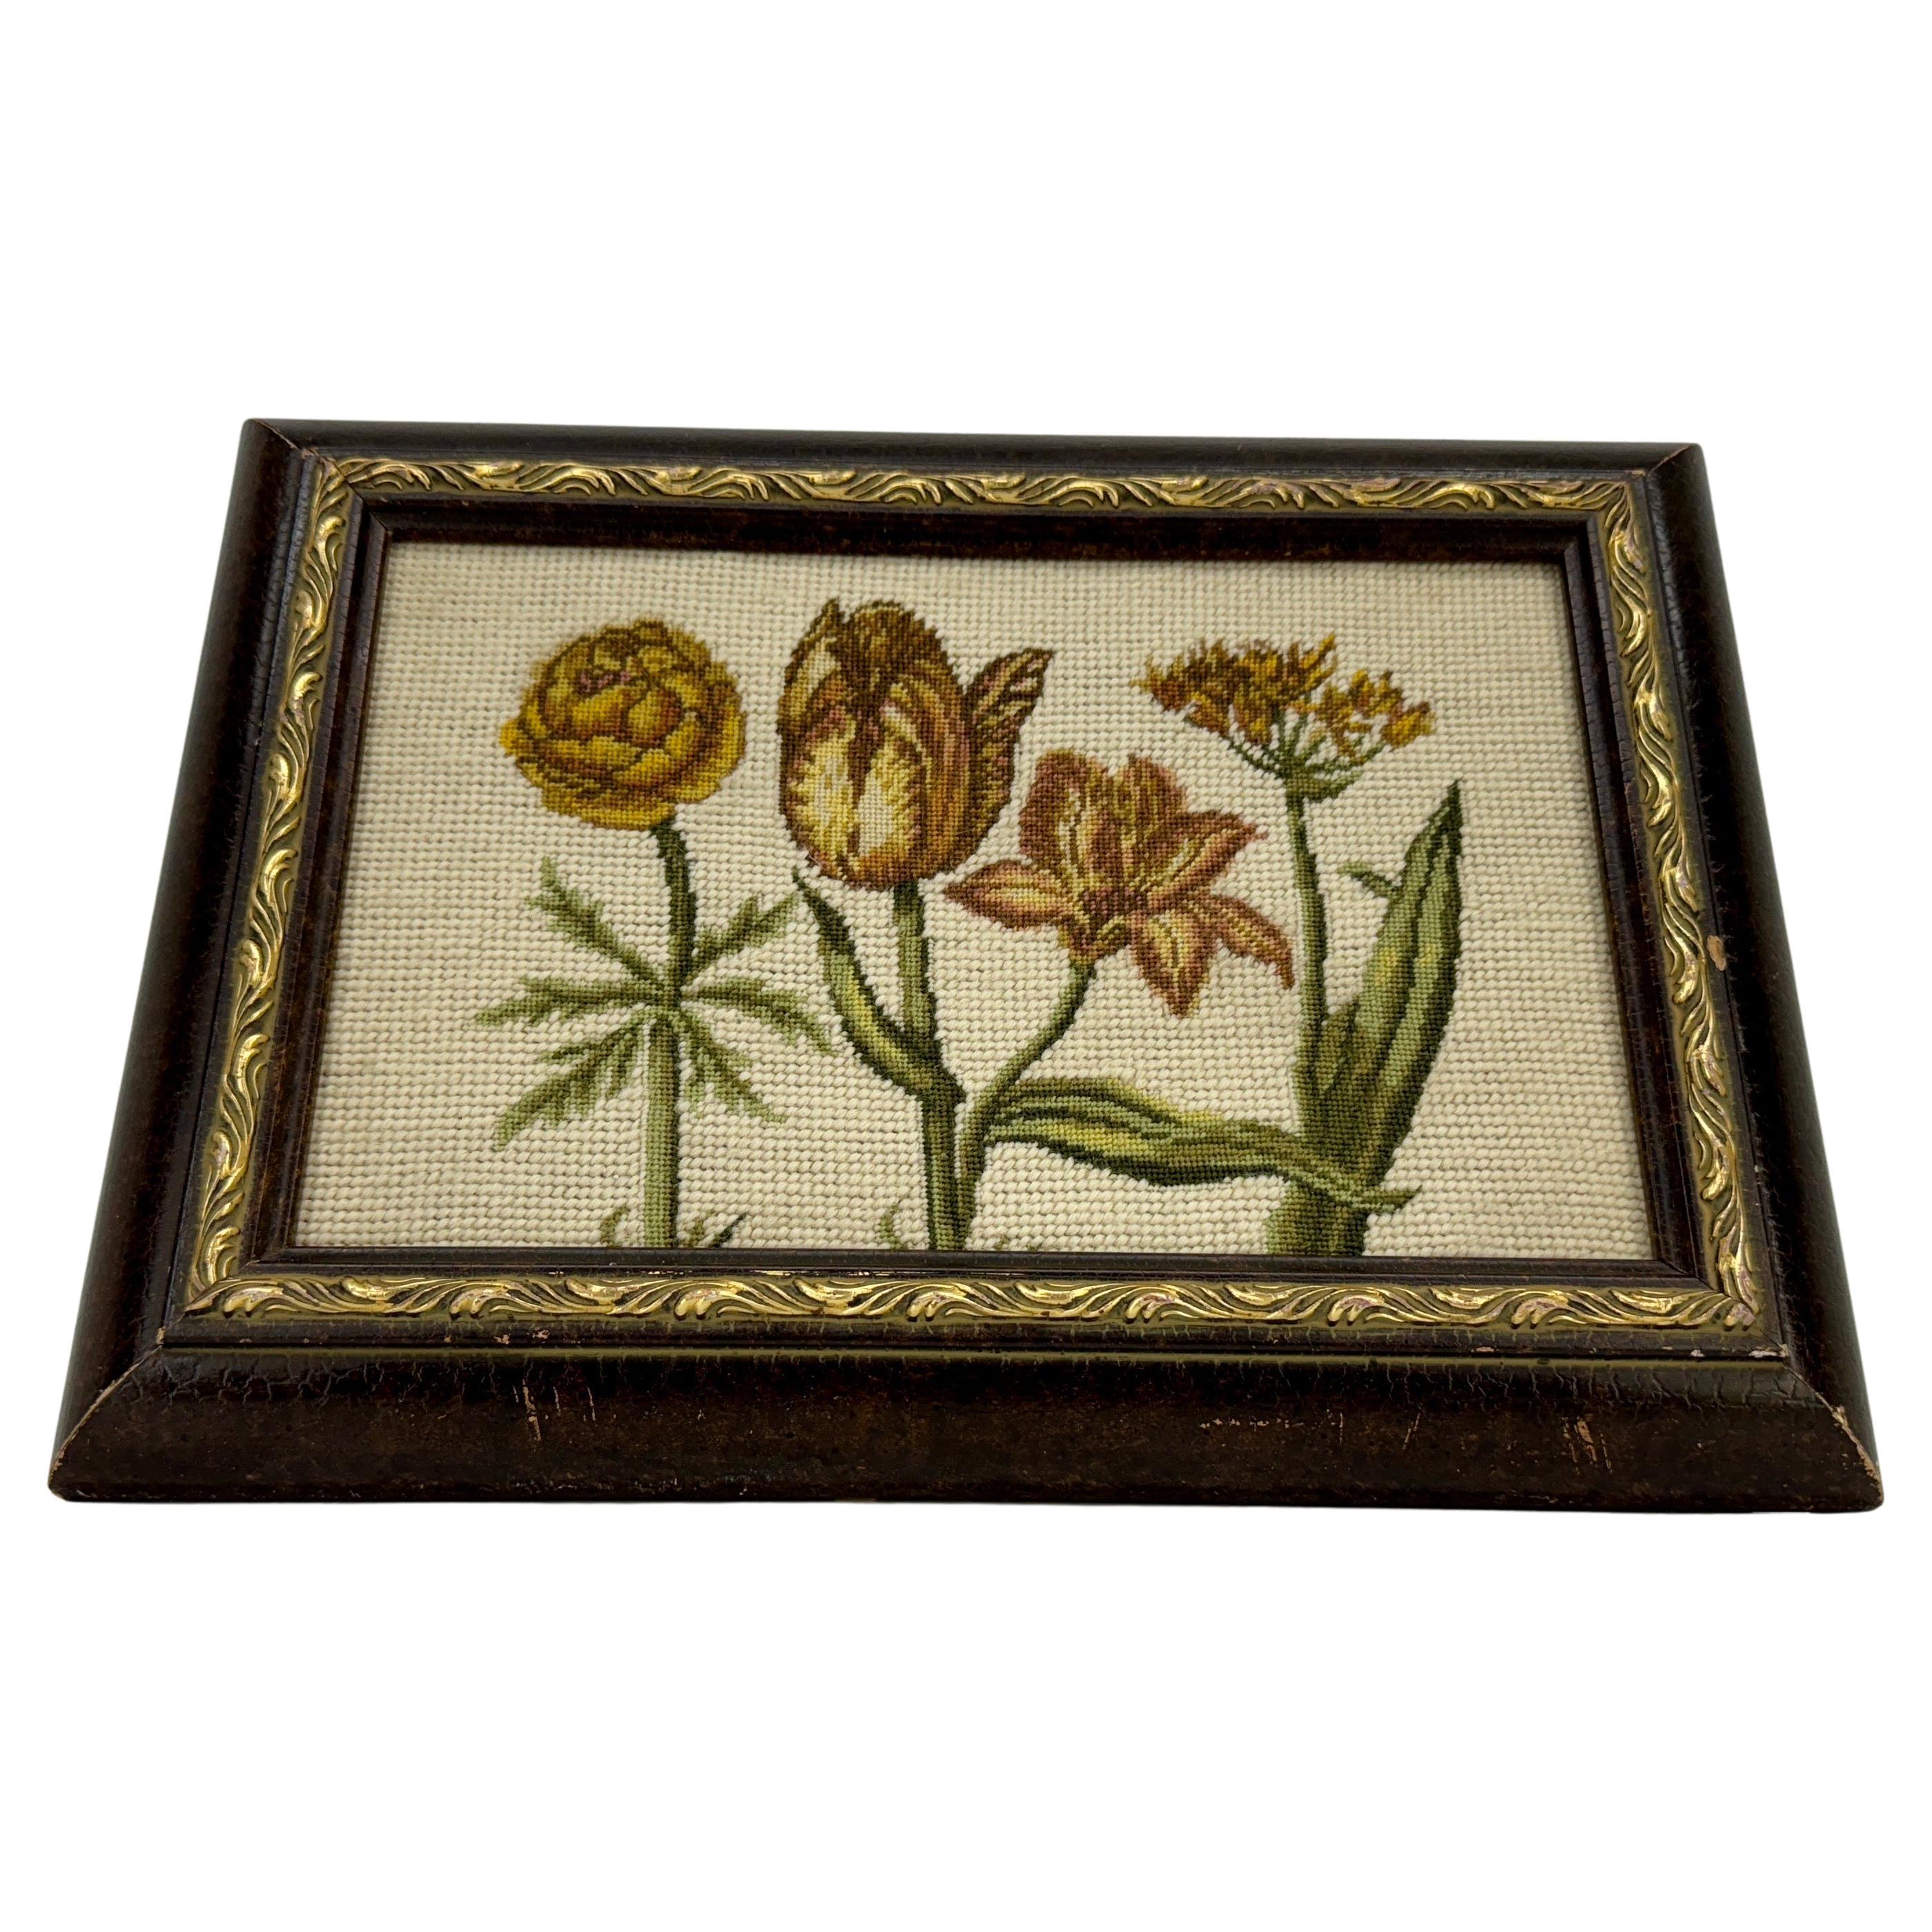 Hand-Crafted Chelsea Textiles Original Needlepoint Tulip Artwork  For Sale